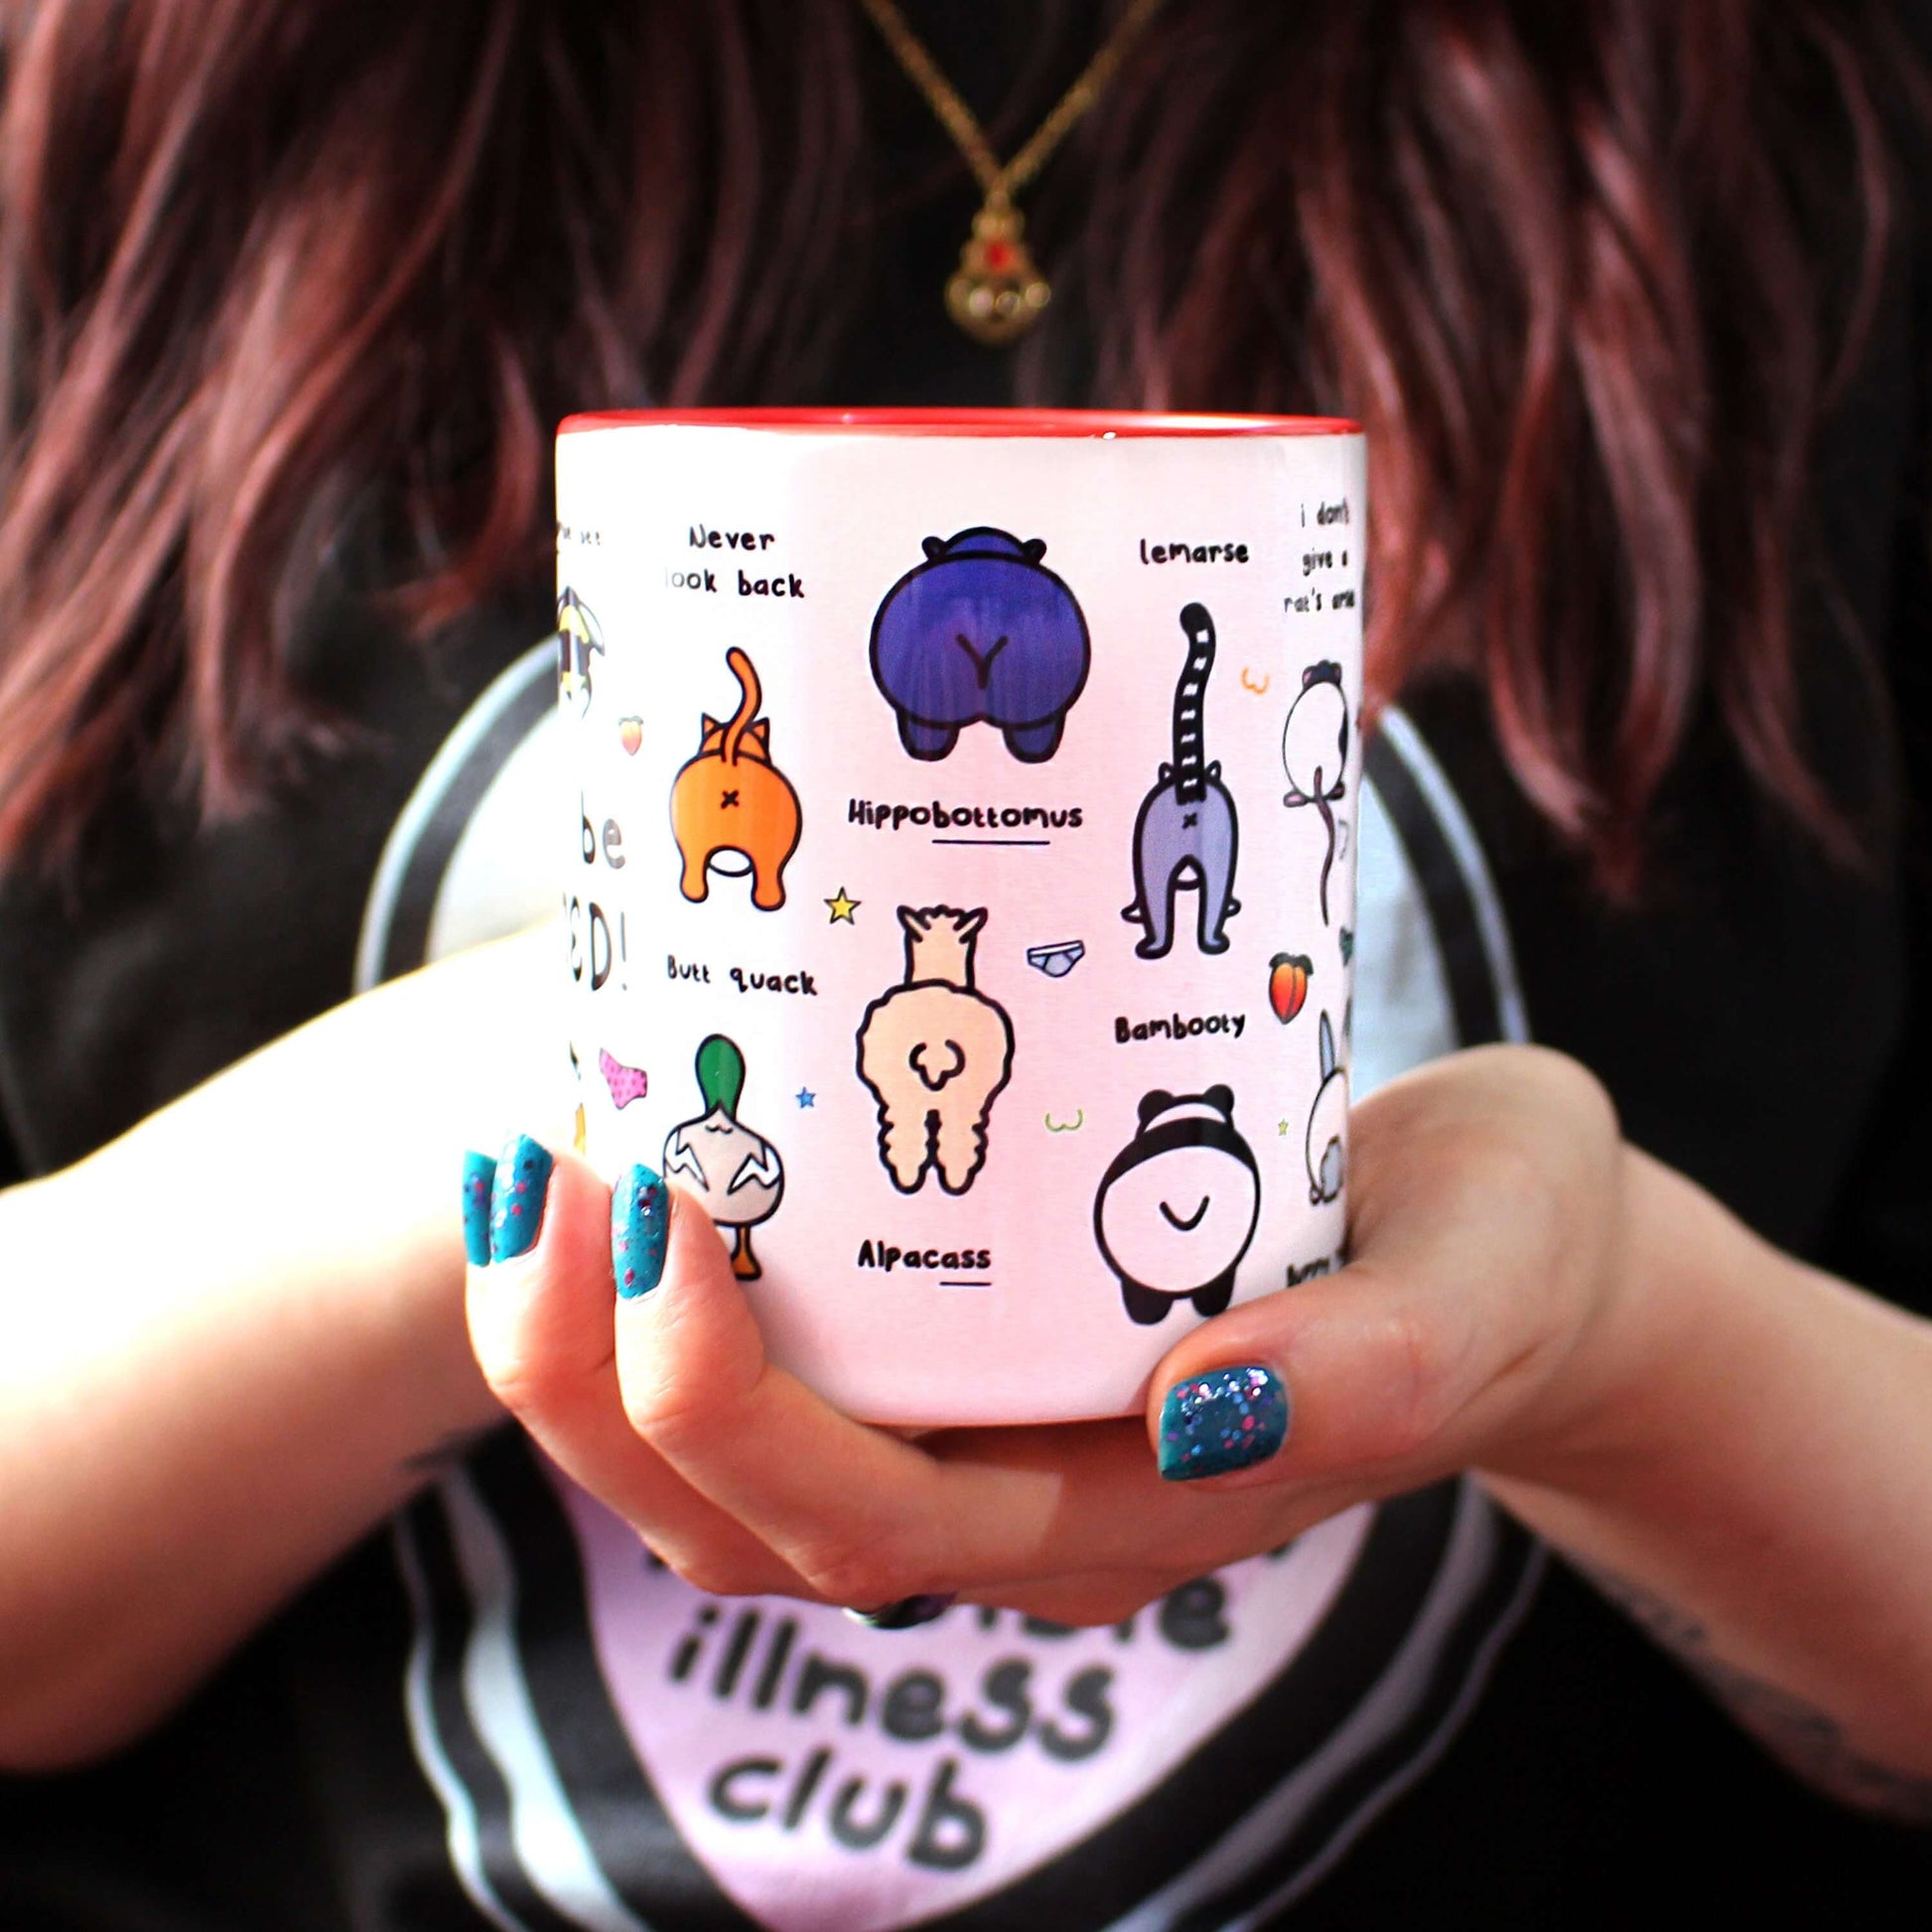 The Can't Be Arsed Mug being held up by Nikky Box with brown hair and blue nail varnish wearing the invisible illness black sweater. The white mug with a red handle and inside features various animal bums with underwear, chest outlines, peaches and multicoloured stars. The mug is facing forward which shows bumble bee - bum ble bee, guinea pig - cavia porcellarse, duck - butt quack, cat - never look back, hippo - hippobottomus, alpaca - alpacass, panda - bambooty and lemur - lemarse, bums.